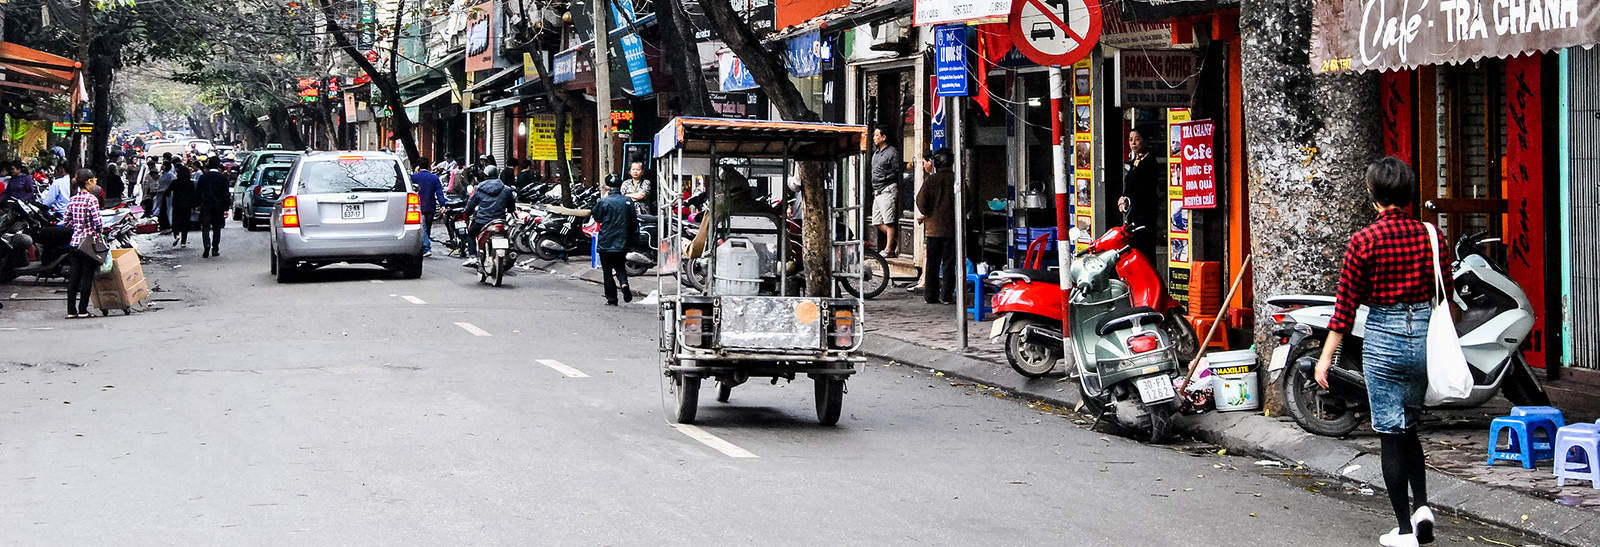 2 Days in Hanoi - What to See, Do and Eat in 48 Hours